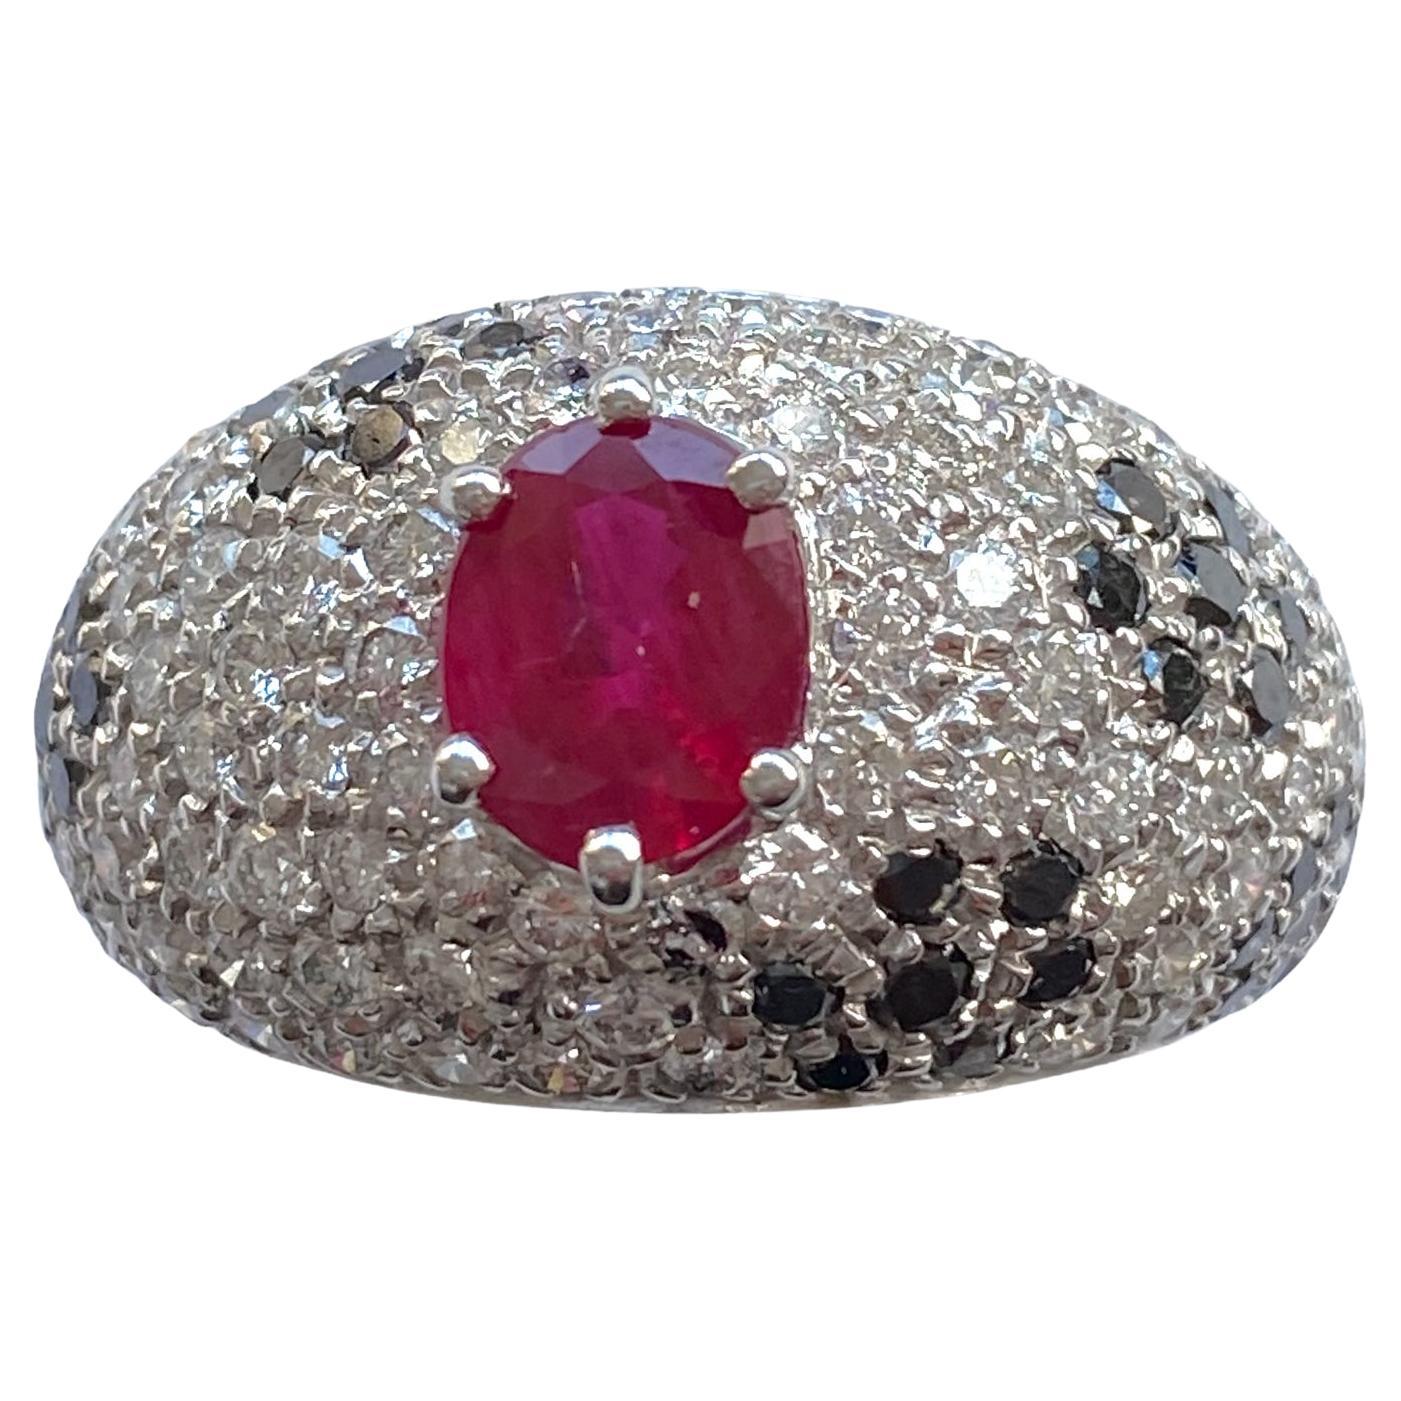 Band Pavè Ring with Natural Ruby, 18kt White Gold, Made in Italy, Vintage